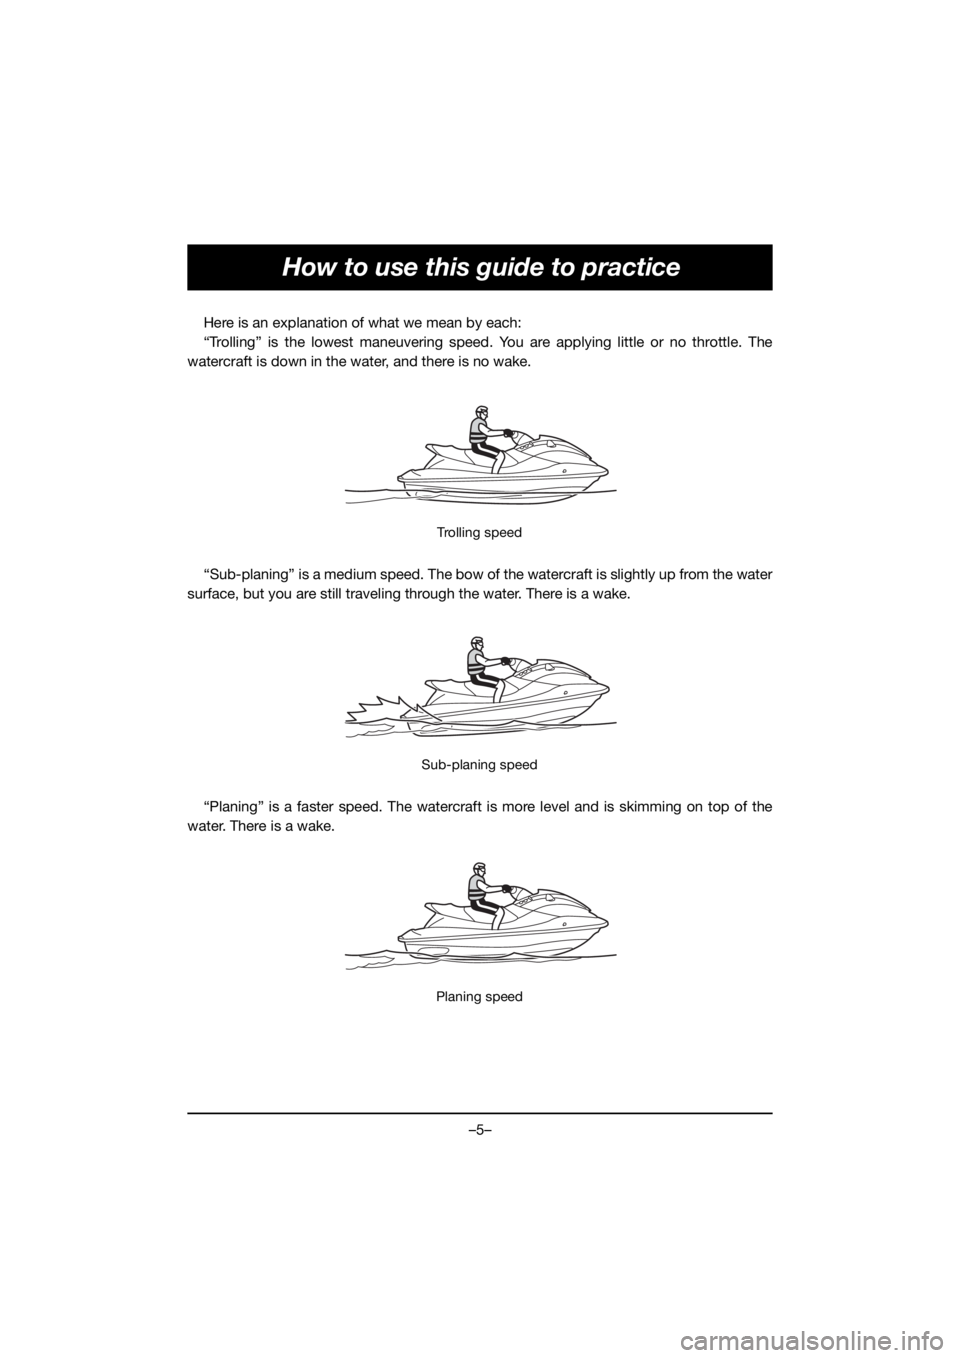 YAMAHA EX 2020  Notices Demploi (in French) –5–
How to use this guide to practice
Here is an explanation of what we mean by each:
“Trolling” is the lowest maneuvering speed. You are applying little or no throttle. The
watercraft is down